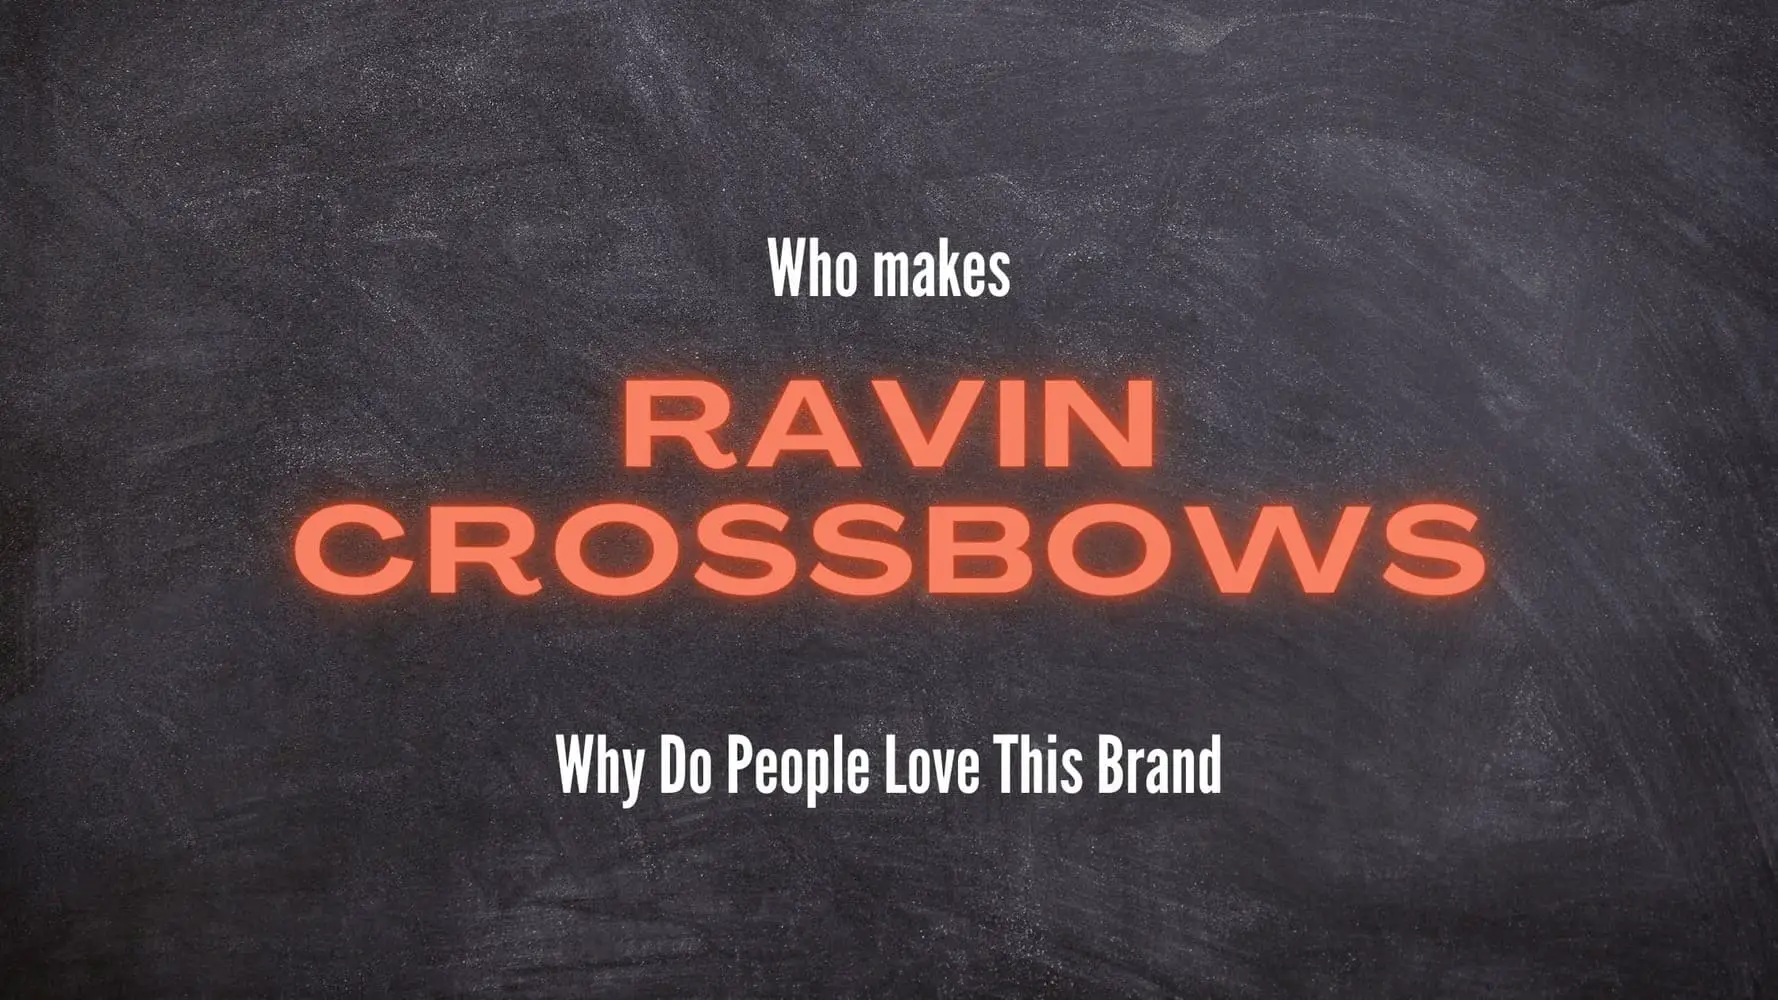 Who Makes Ravin Crossbows